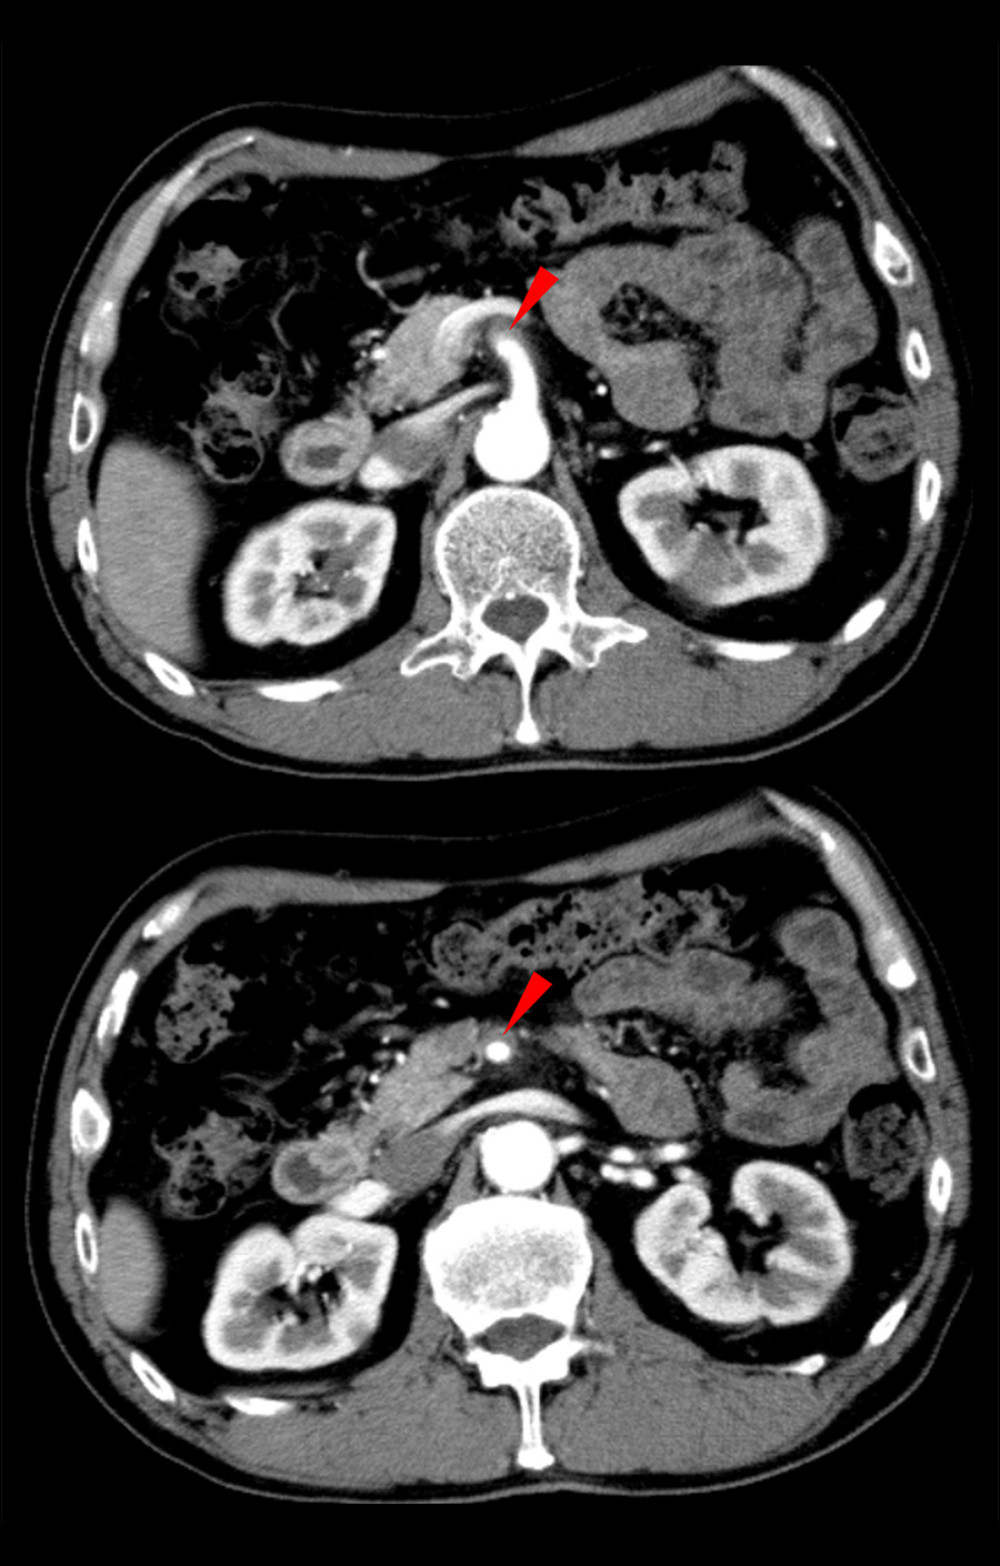 Contrast-enhanced CT scanning showed an superior mesenteric artery dissection (SMAD) without evidence of aortic involvement.